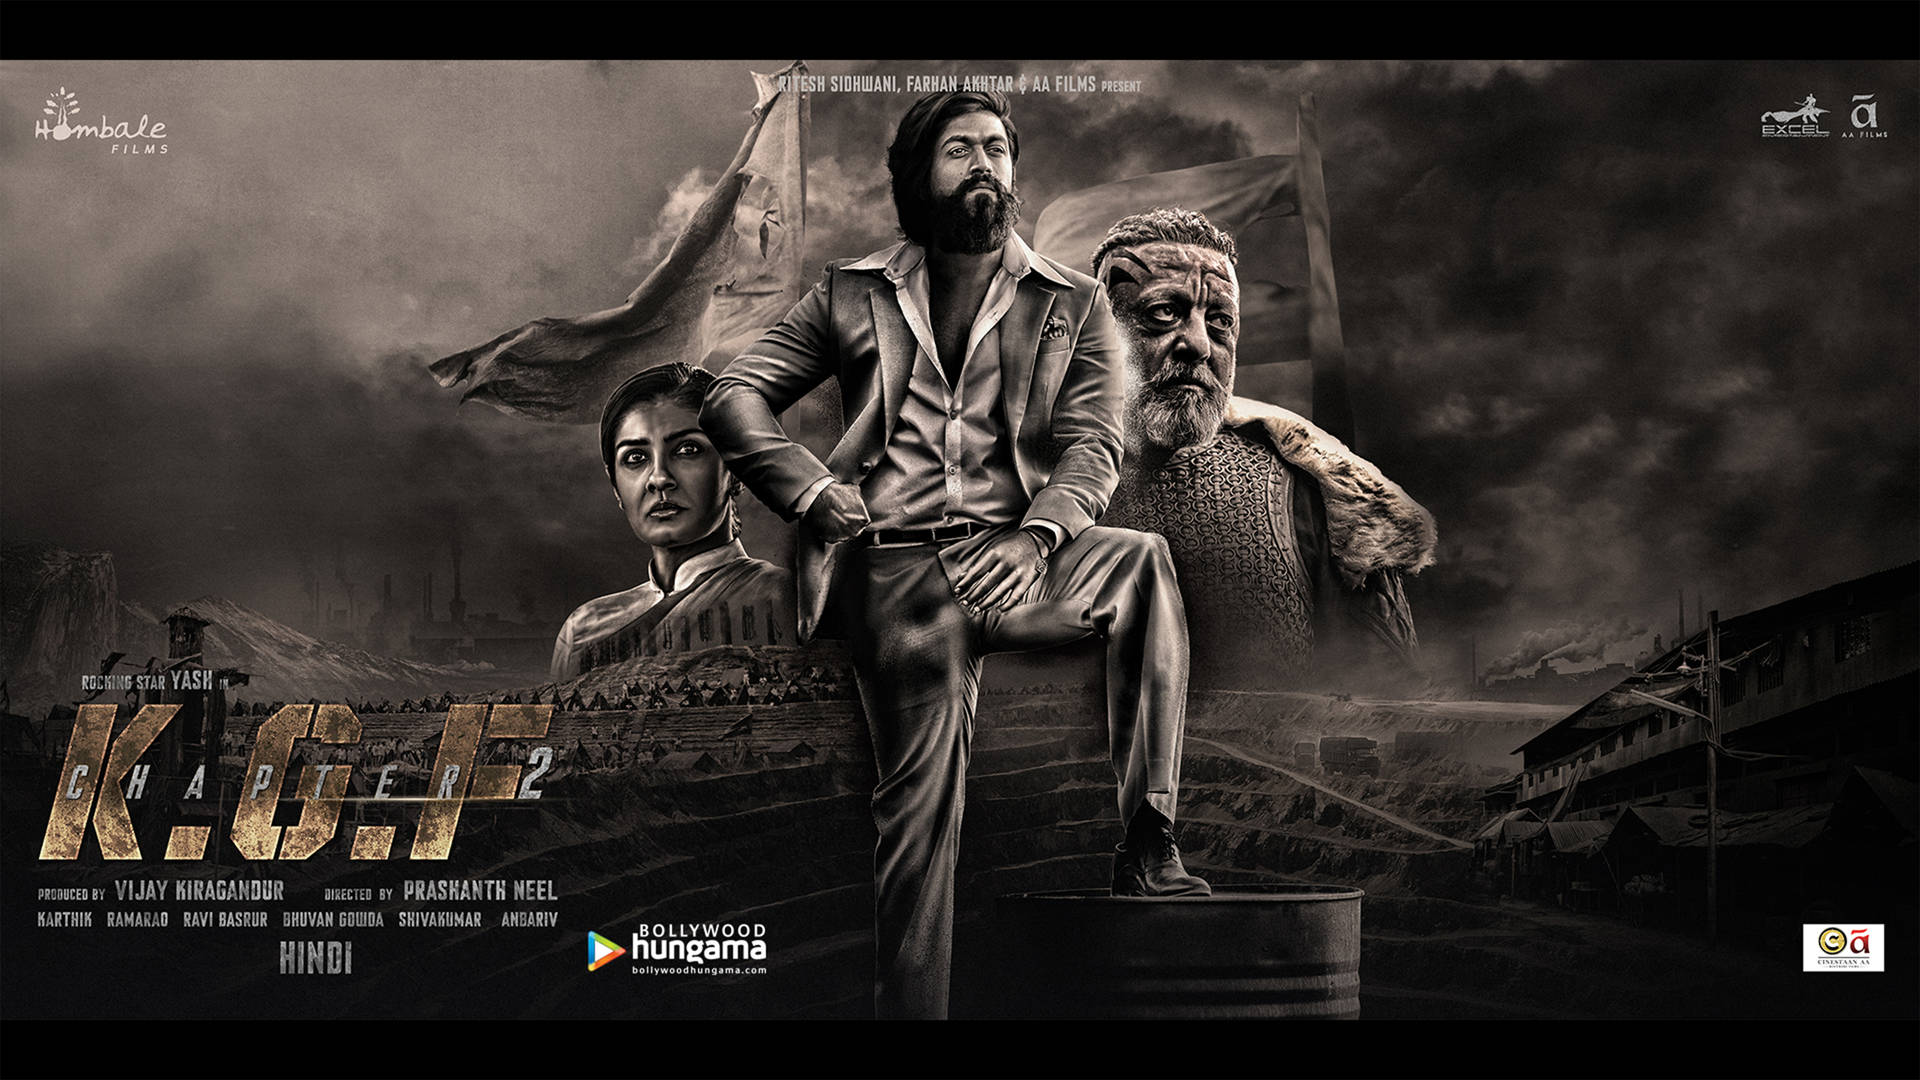 KGF  Wallpaper  Mobile Wallpaper  Desktop Wallpaper  HD Wallpaper   Yash  Movie  India  Funny minion pictures Blur background photography  Actor picture